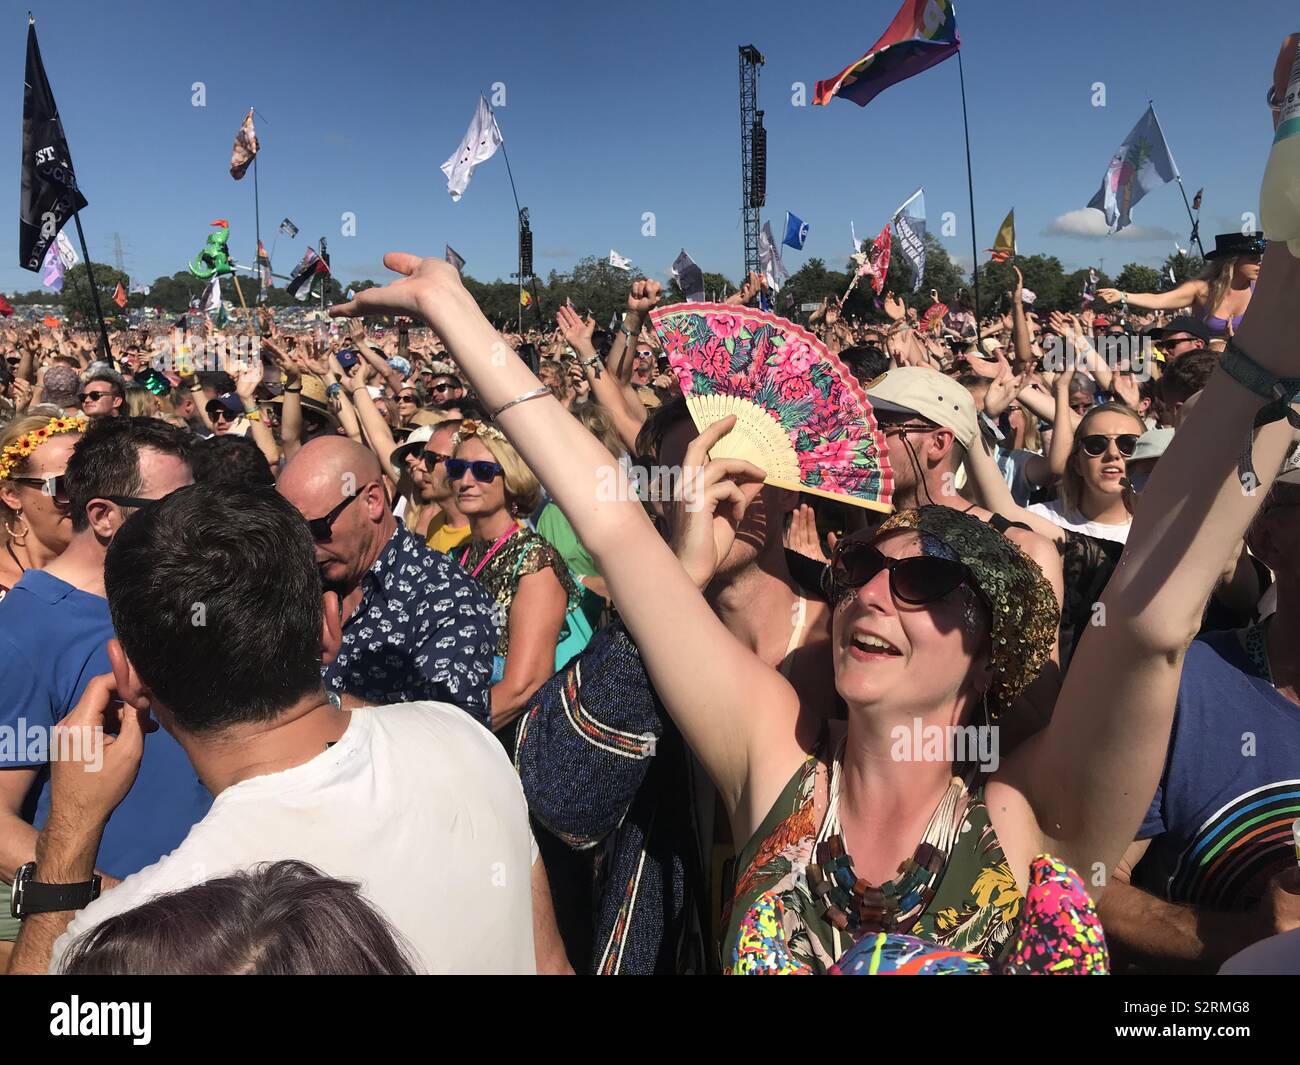 The huge crowd dancing to the set by Kylie Minogue at the Glastonbury Festival 2019 Stock Photo